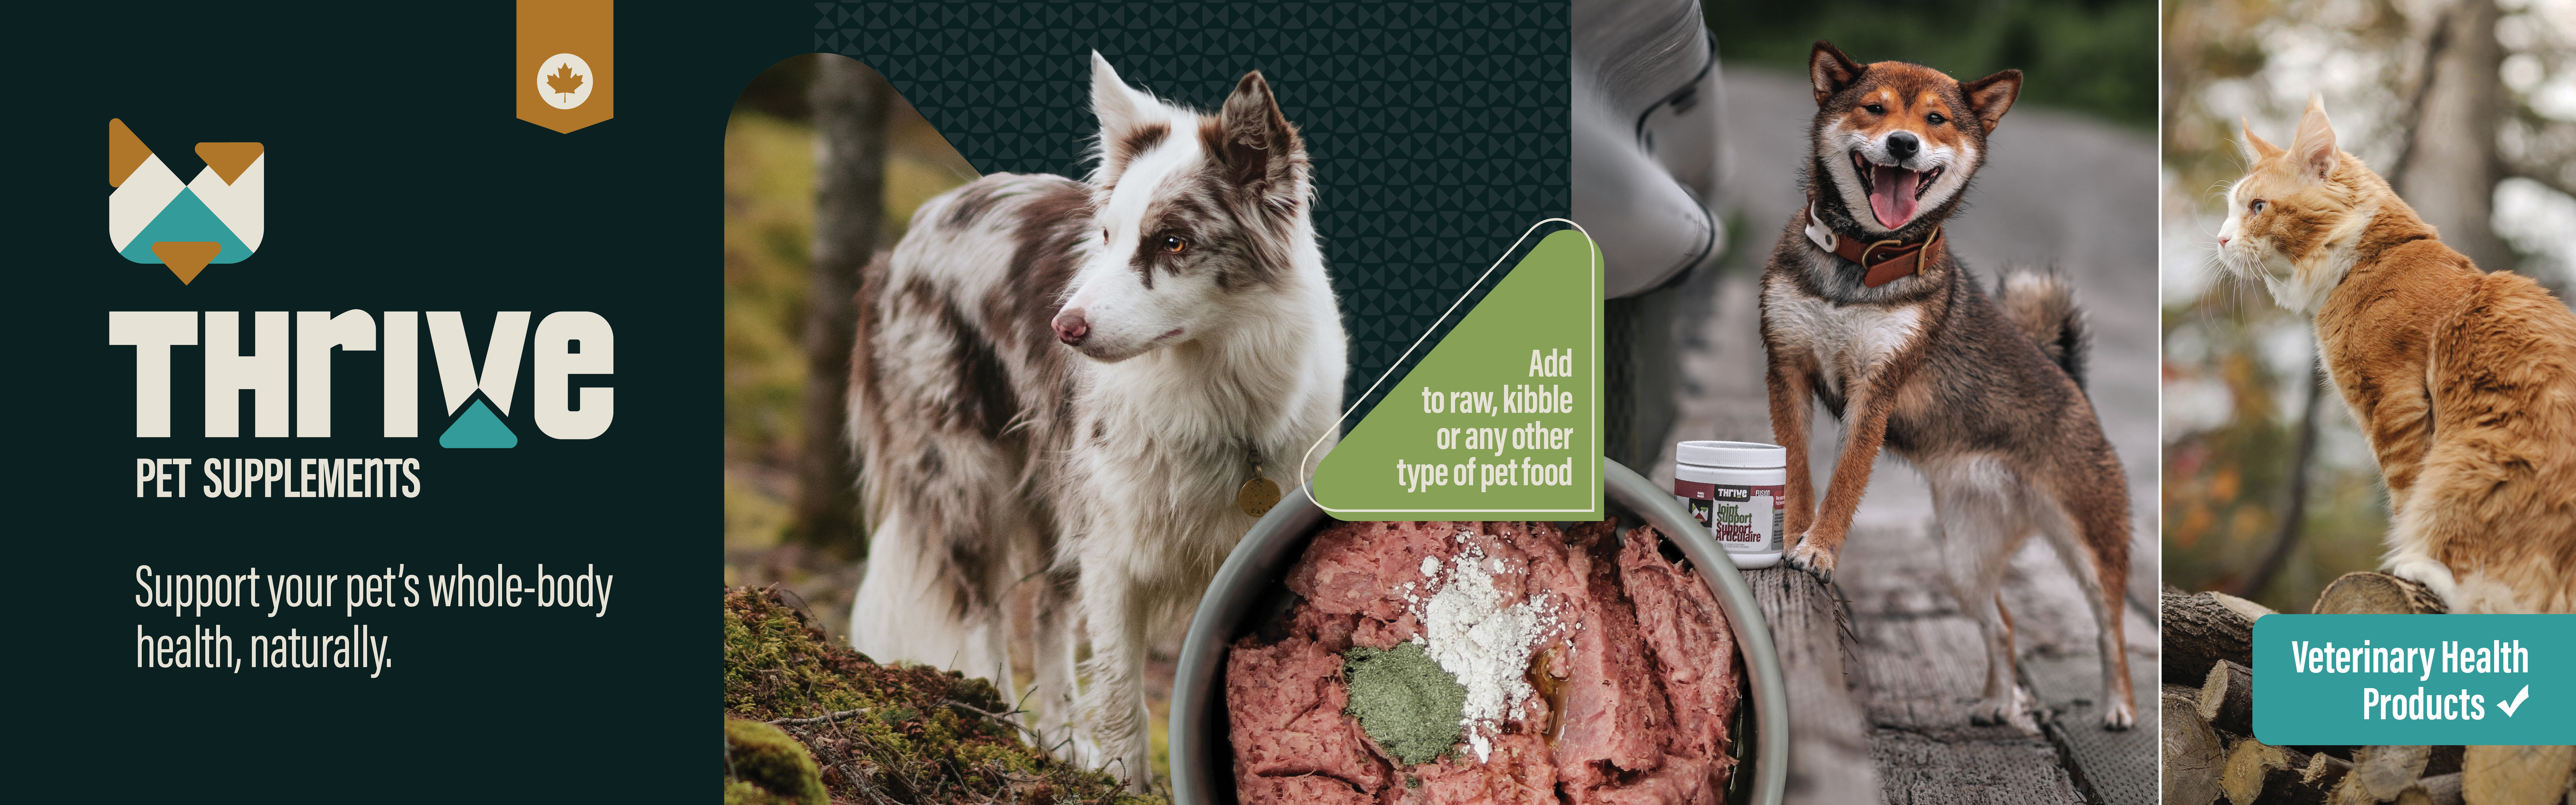 Thrive Pet Supplements. Support you pet's whole body health, naturally.